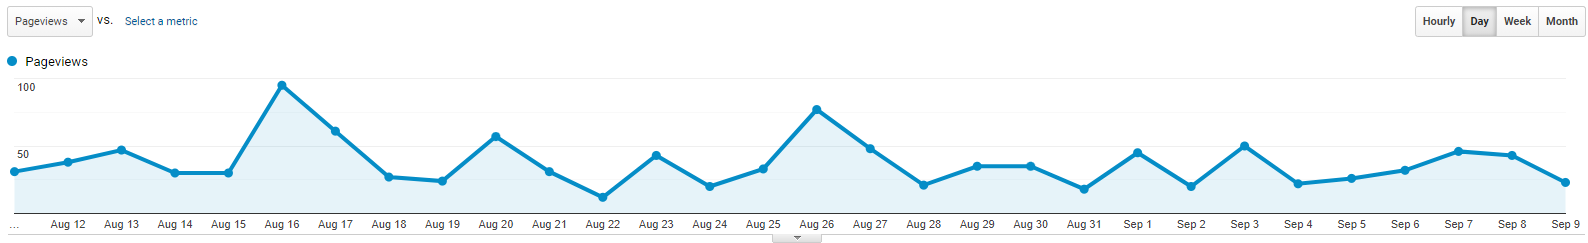 Google Analytics graph showing page interest over time.